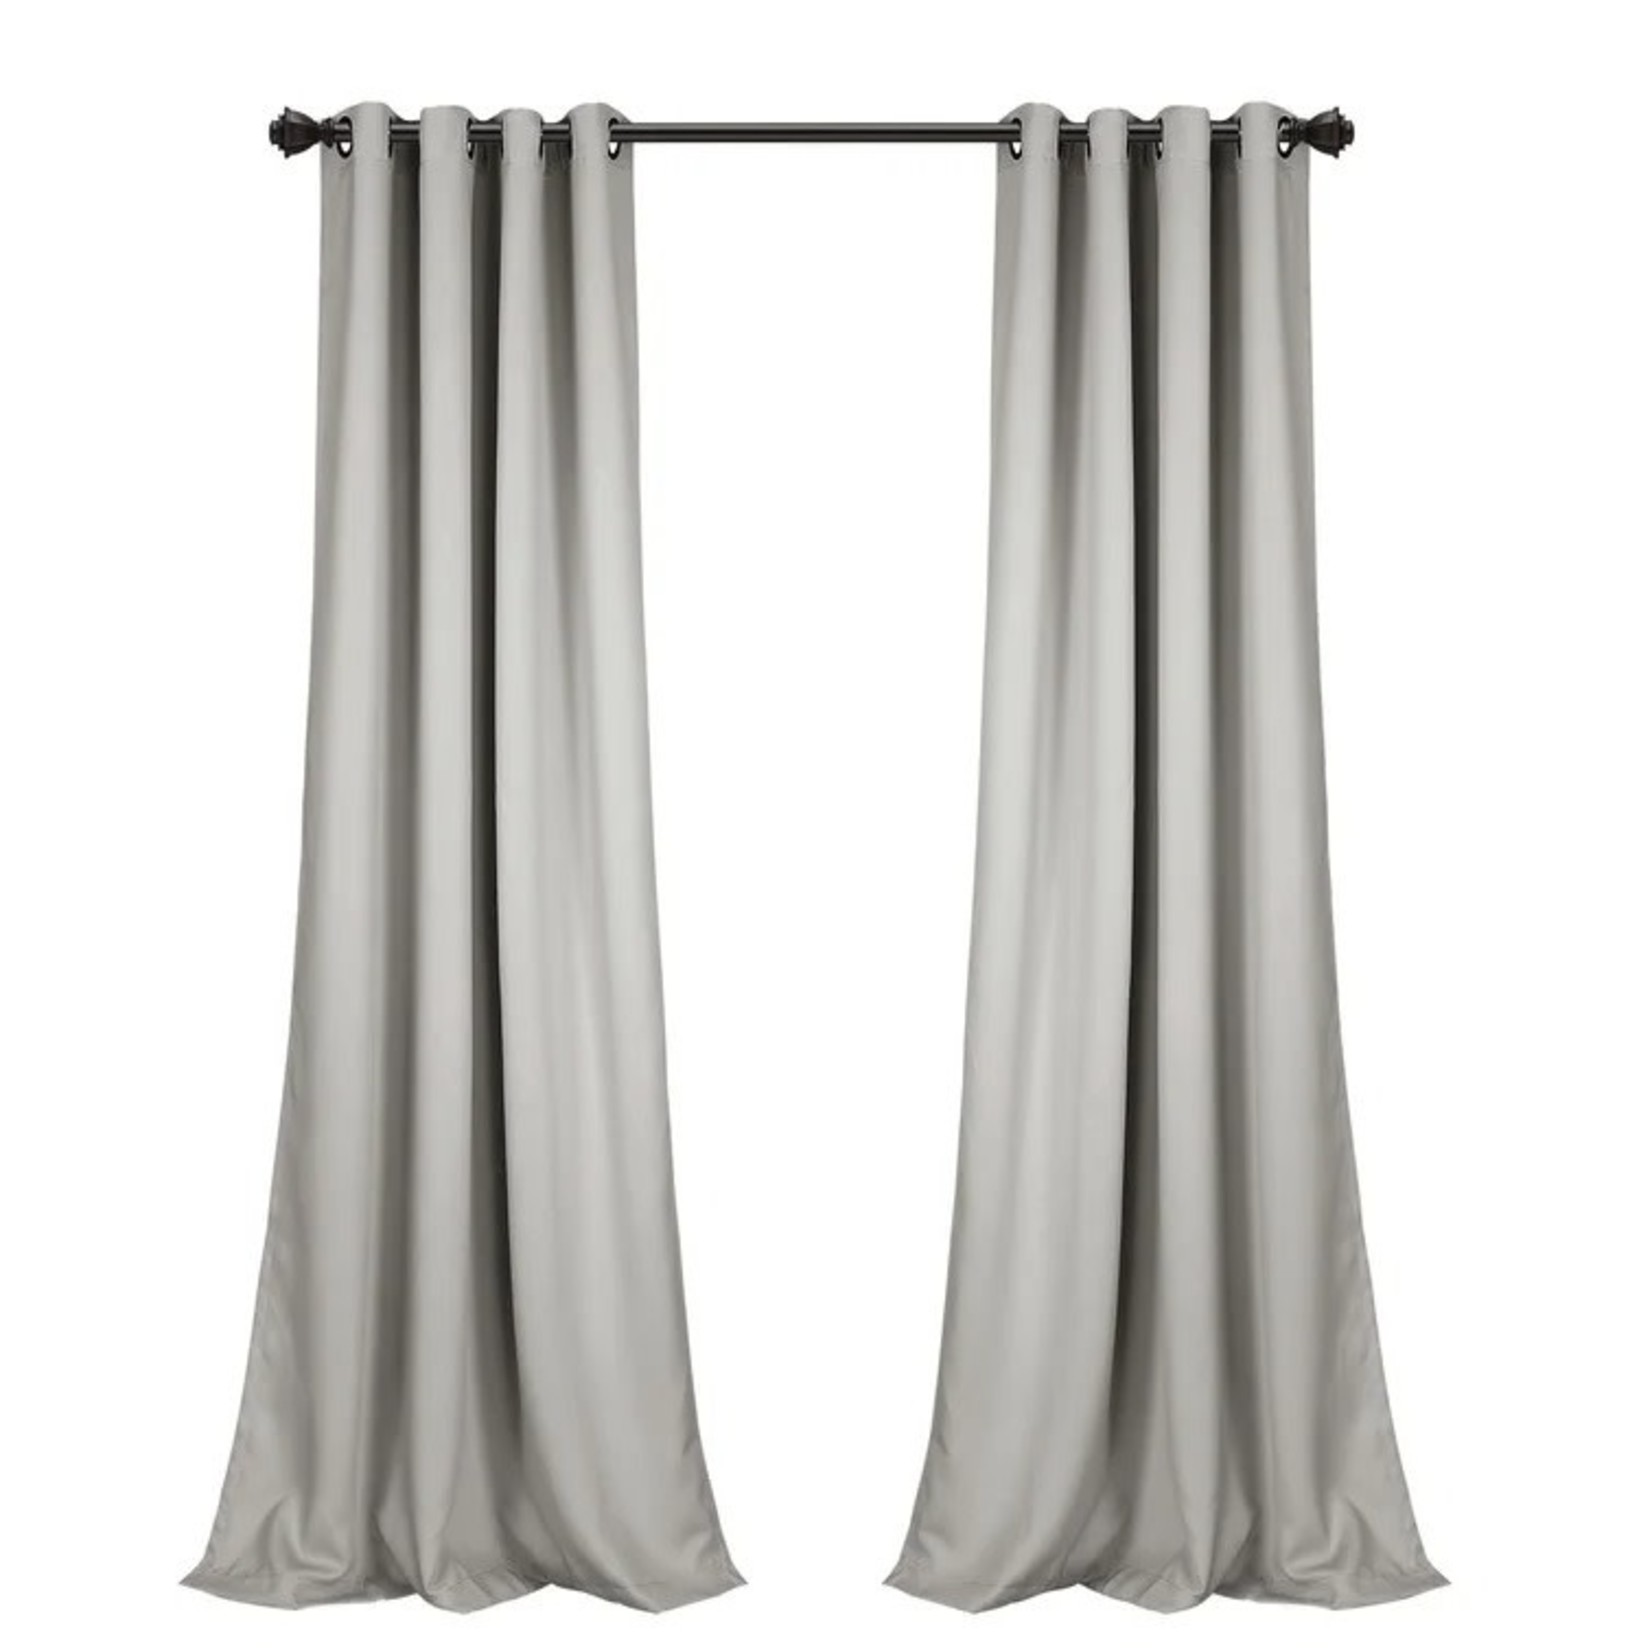 *52" x 108" Ketterman Solid Color Blackout Thermal Curtains - Set of 2 - Light Grey